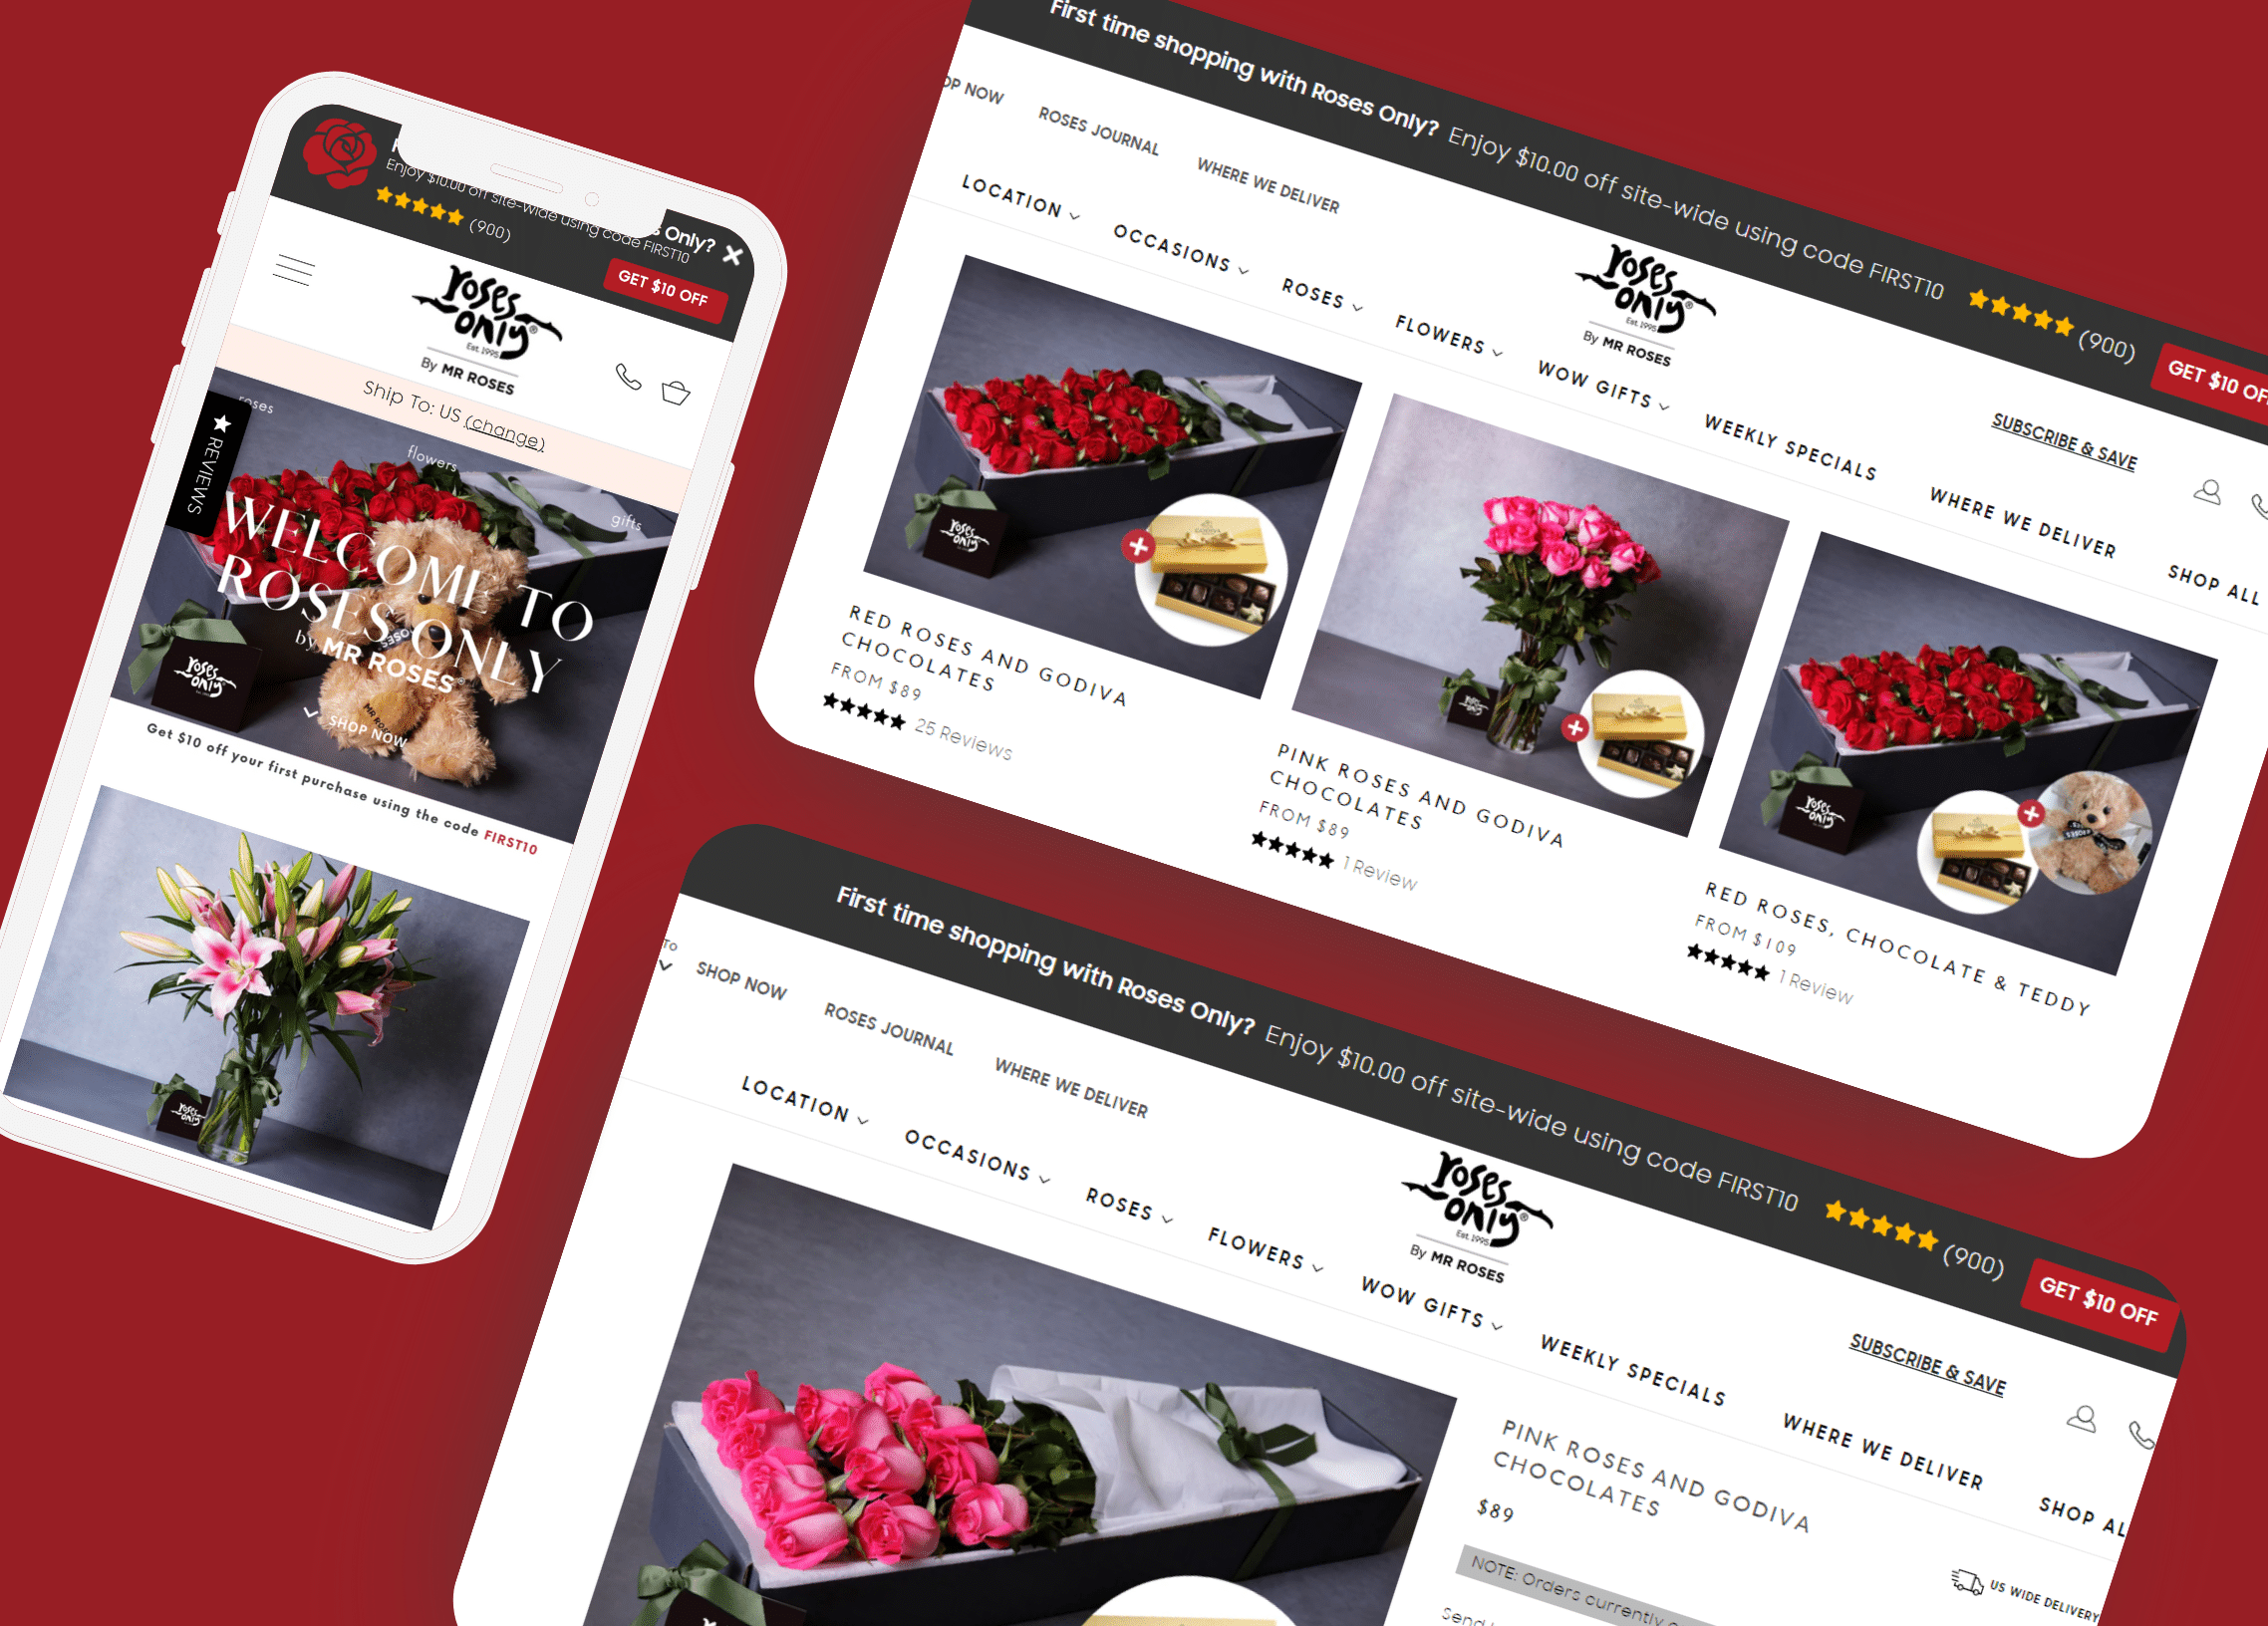 Roses Only – Revitalizing User Experience Through Website Redesign